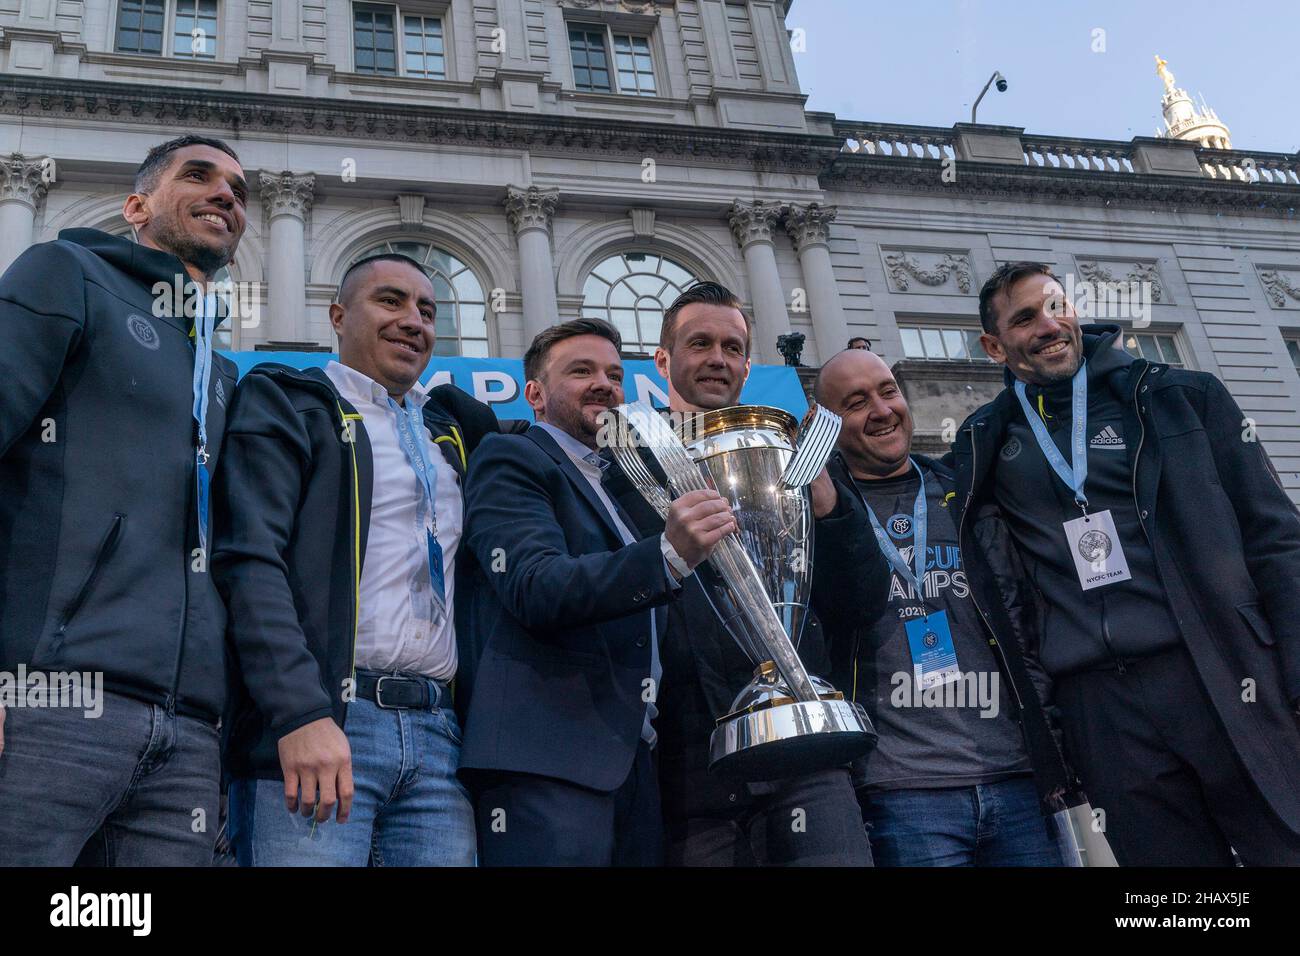 New York, New York, USA. 14th Dec, 2021. Coaching team with MLS Cup poses during celebration for NYCFC winning the 2021 MLS Cup on City Hall steps. NYCFC finished the regular season in 4th place and played almost all playoff games away. Winning the MLS Cup is the first trophy won by the franchise since it was established 7 years ago. NYCFC is part of the City Football Group which owns football clubs around the world. Sean Johnson was named MVP of the playofffs. Head coach Ronny Deila stands 3rd from right. (Credit Image: © Lev Radin/Pacific Press via ZUMA Press Wire) Stock Photo